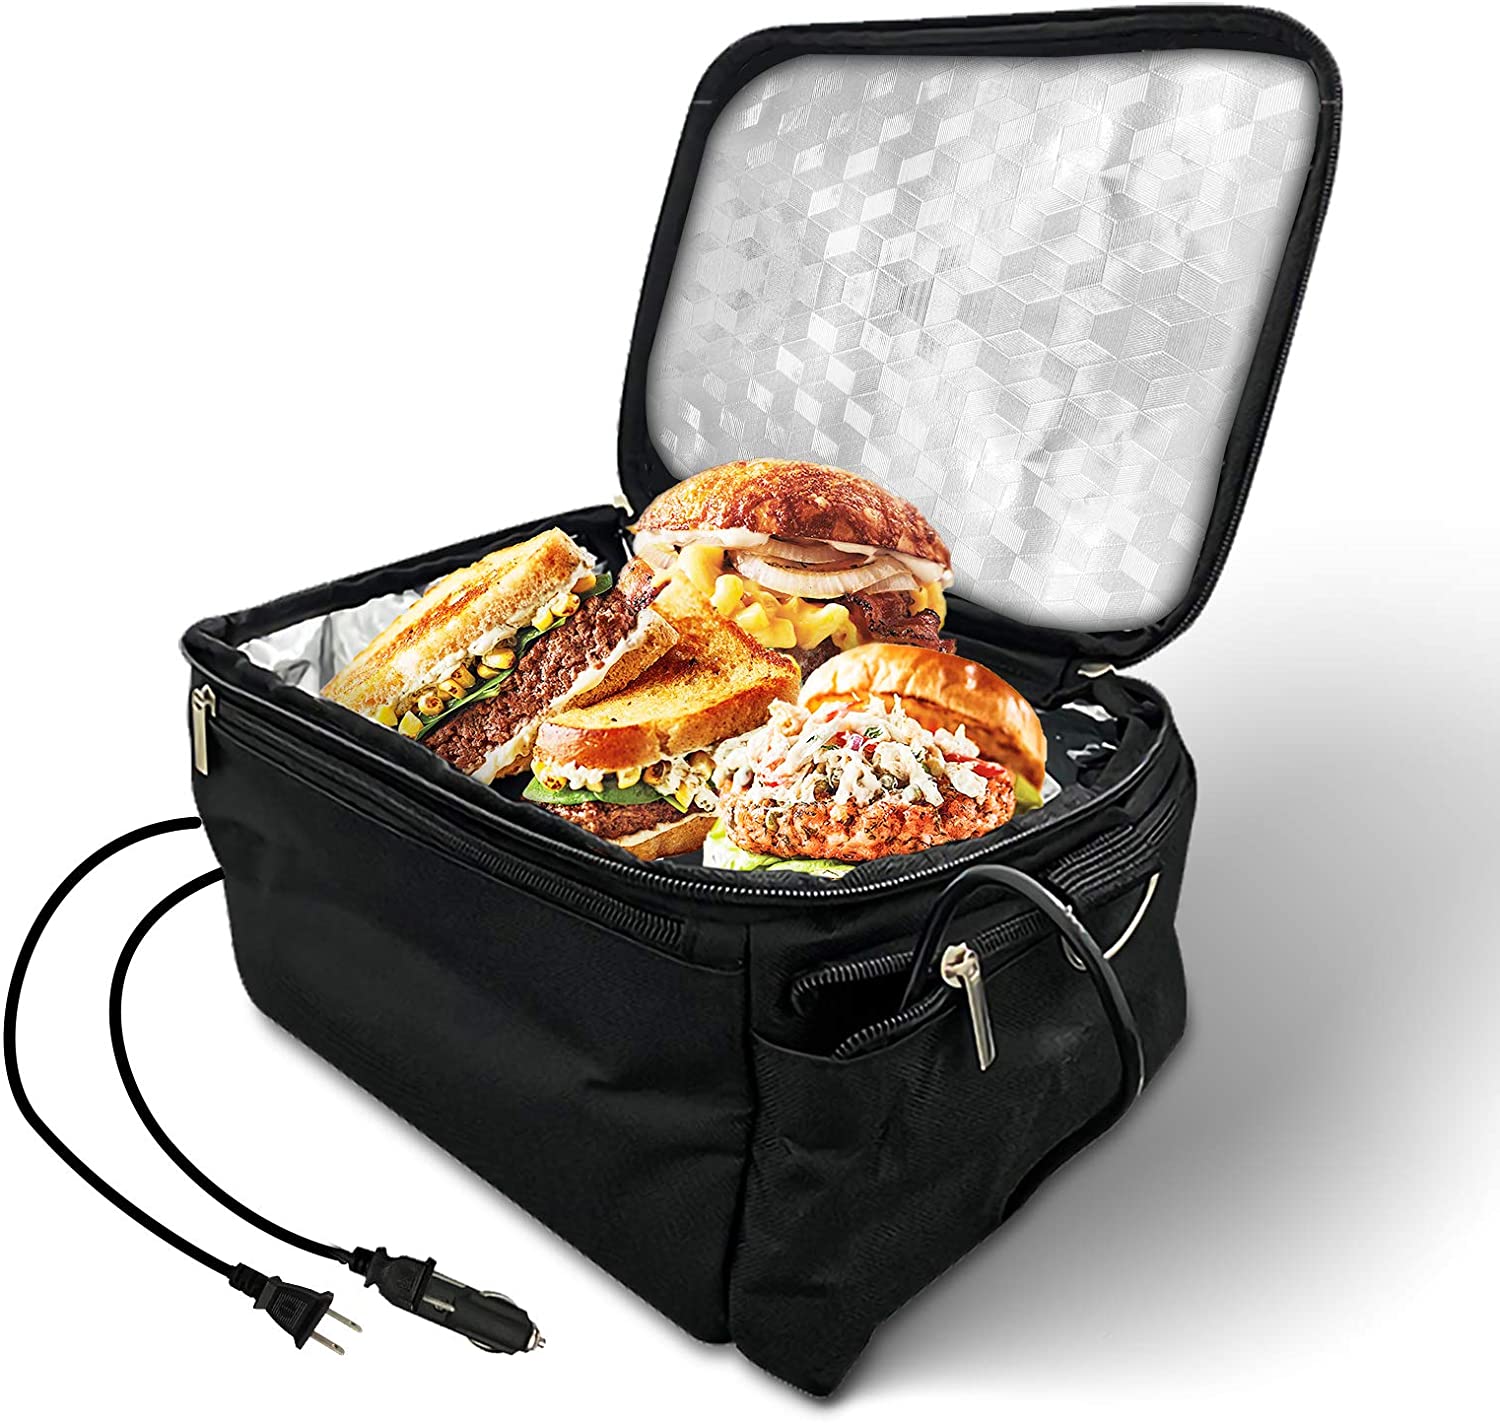 Portable Oven Heated